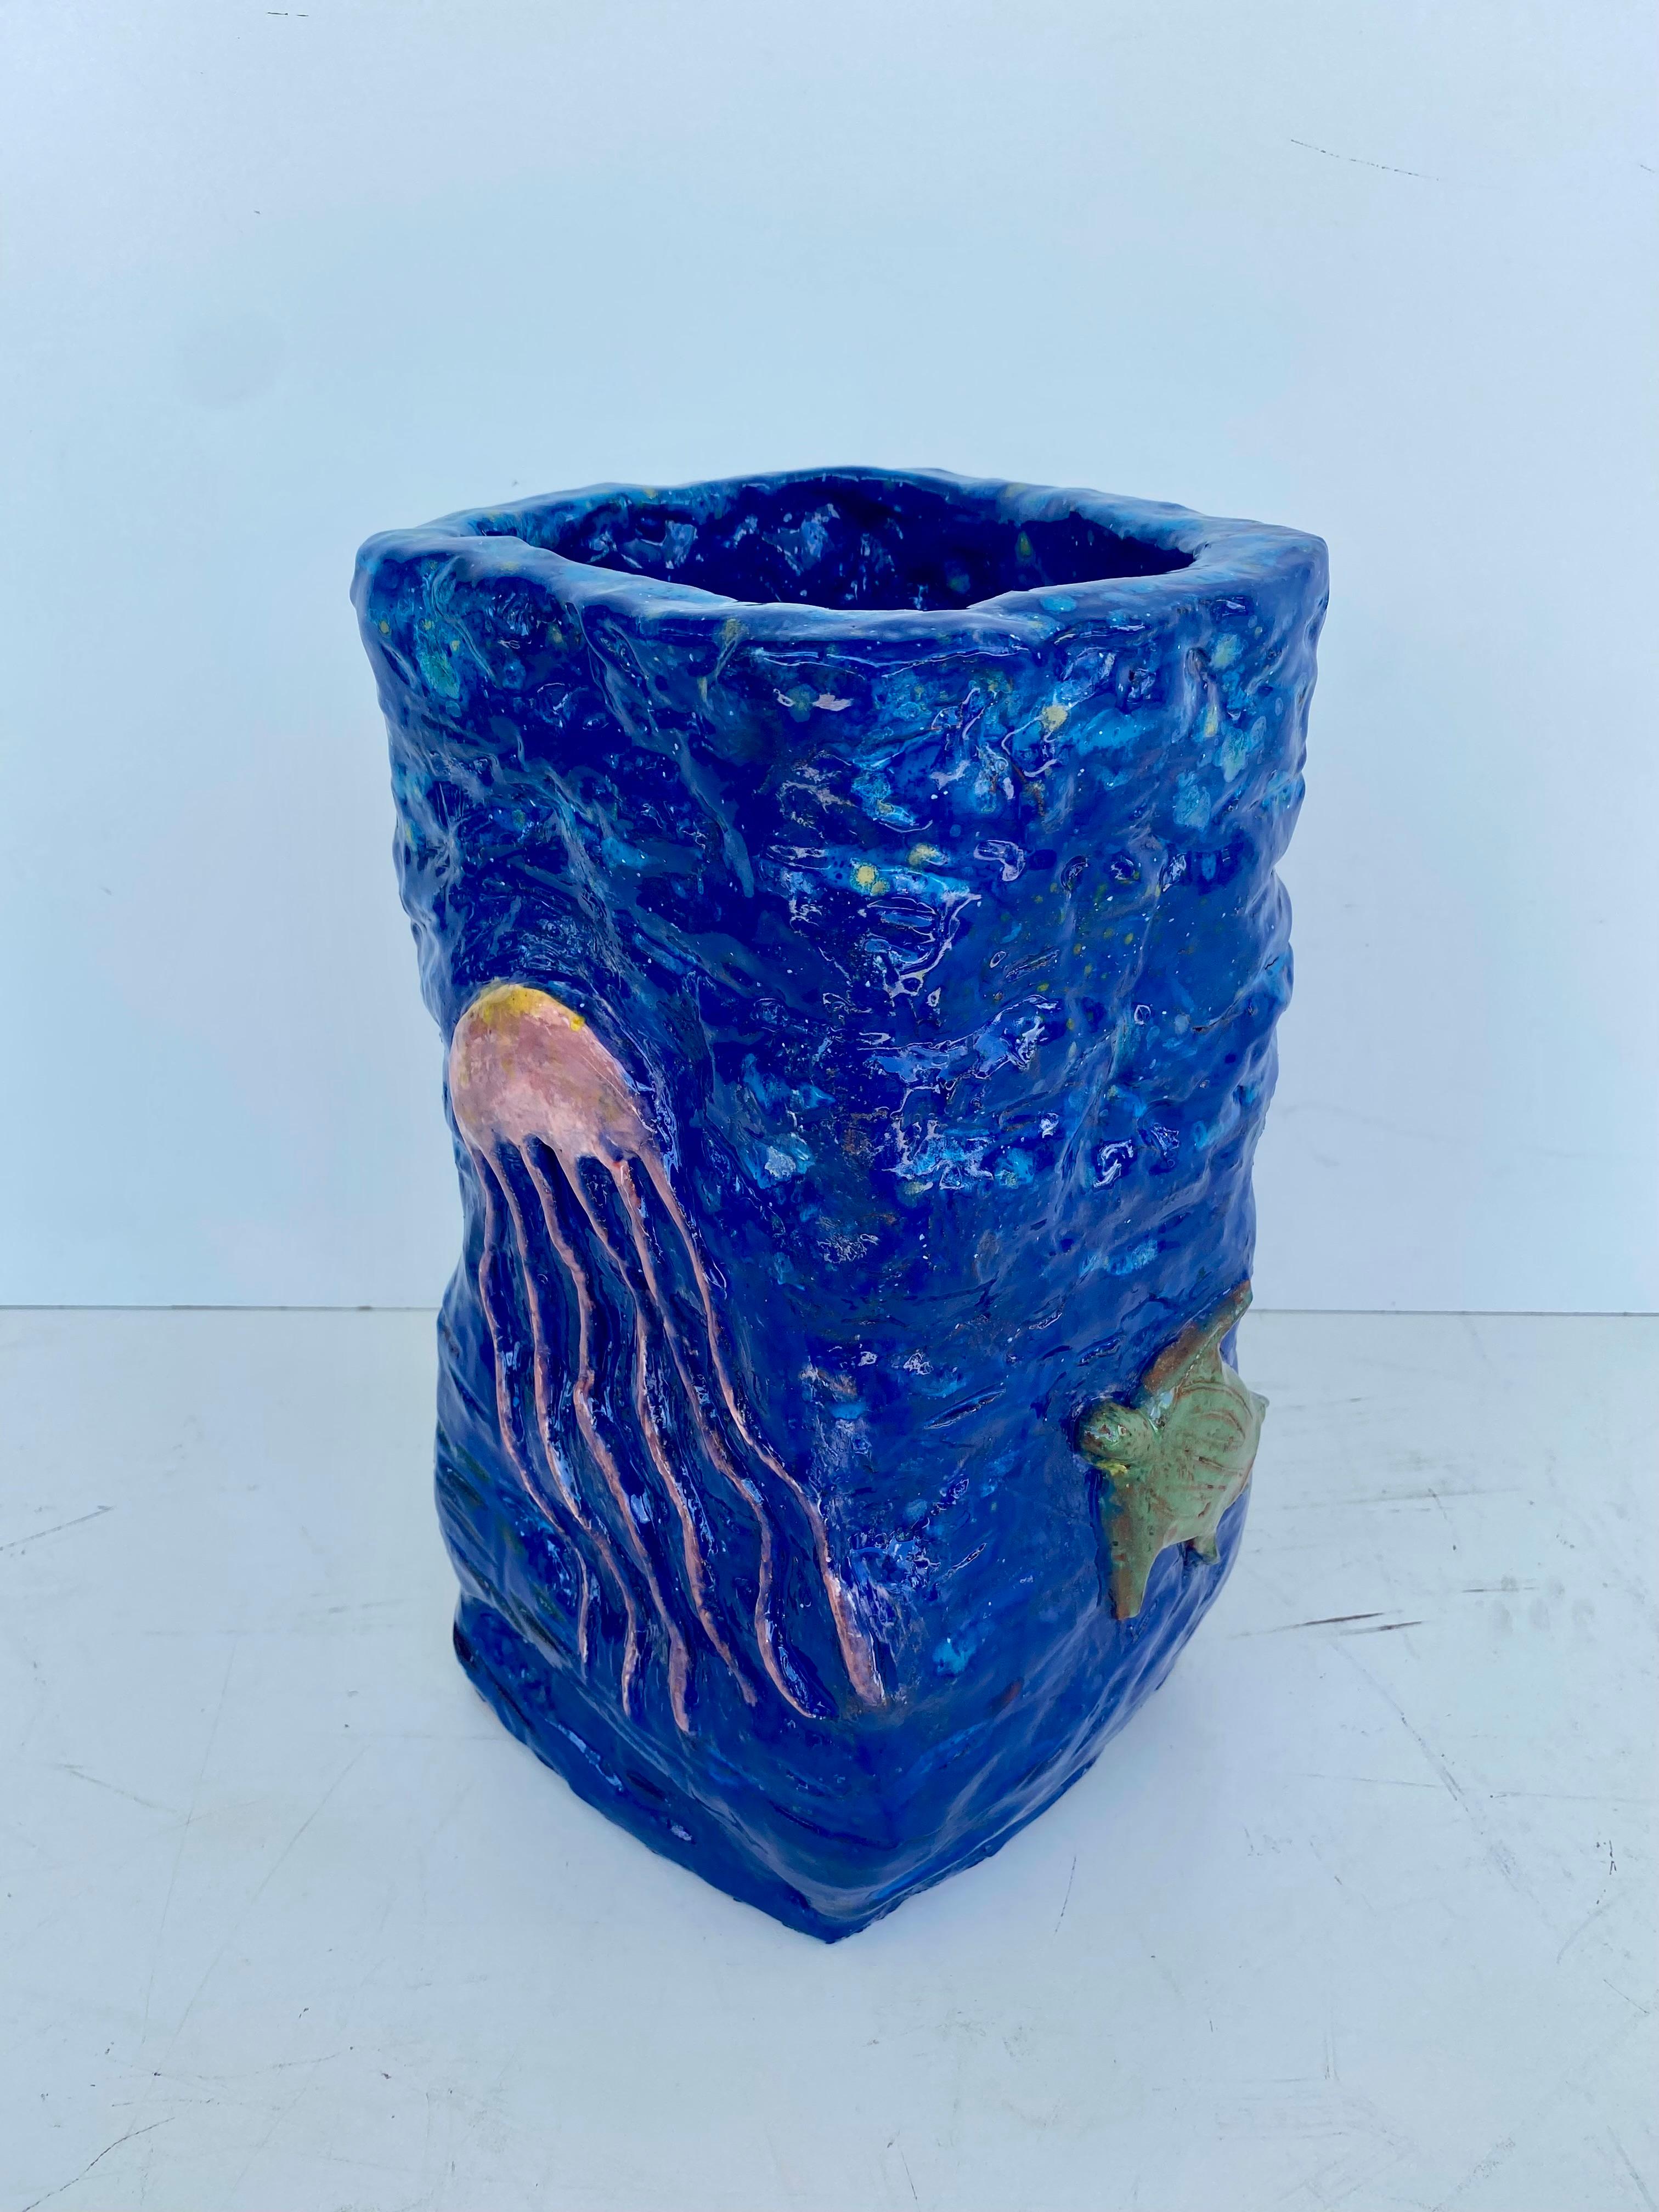 Unique Hand-Made Sculptural Glazed Ceramic Umbrella Stand by Rexx Fischer 2024

Offered for sale is a hand-made ceramic umbrella stand that is signed and dated 2024 by Rexx Fischer. This colorful umbrella stand was inspired by the Florida Keys and